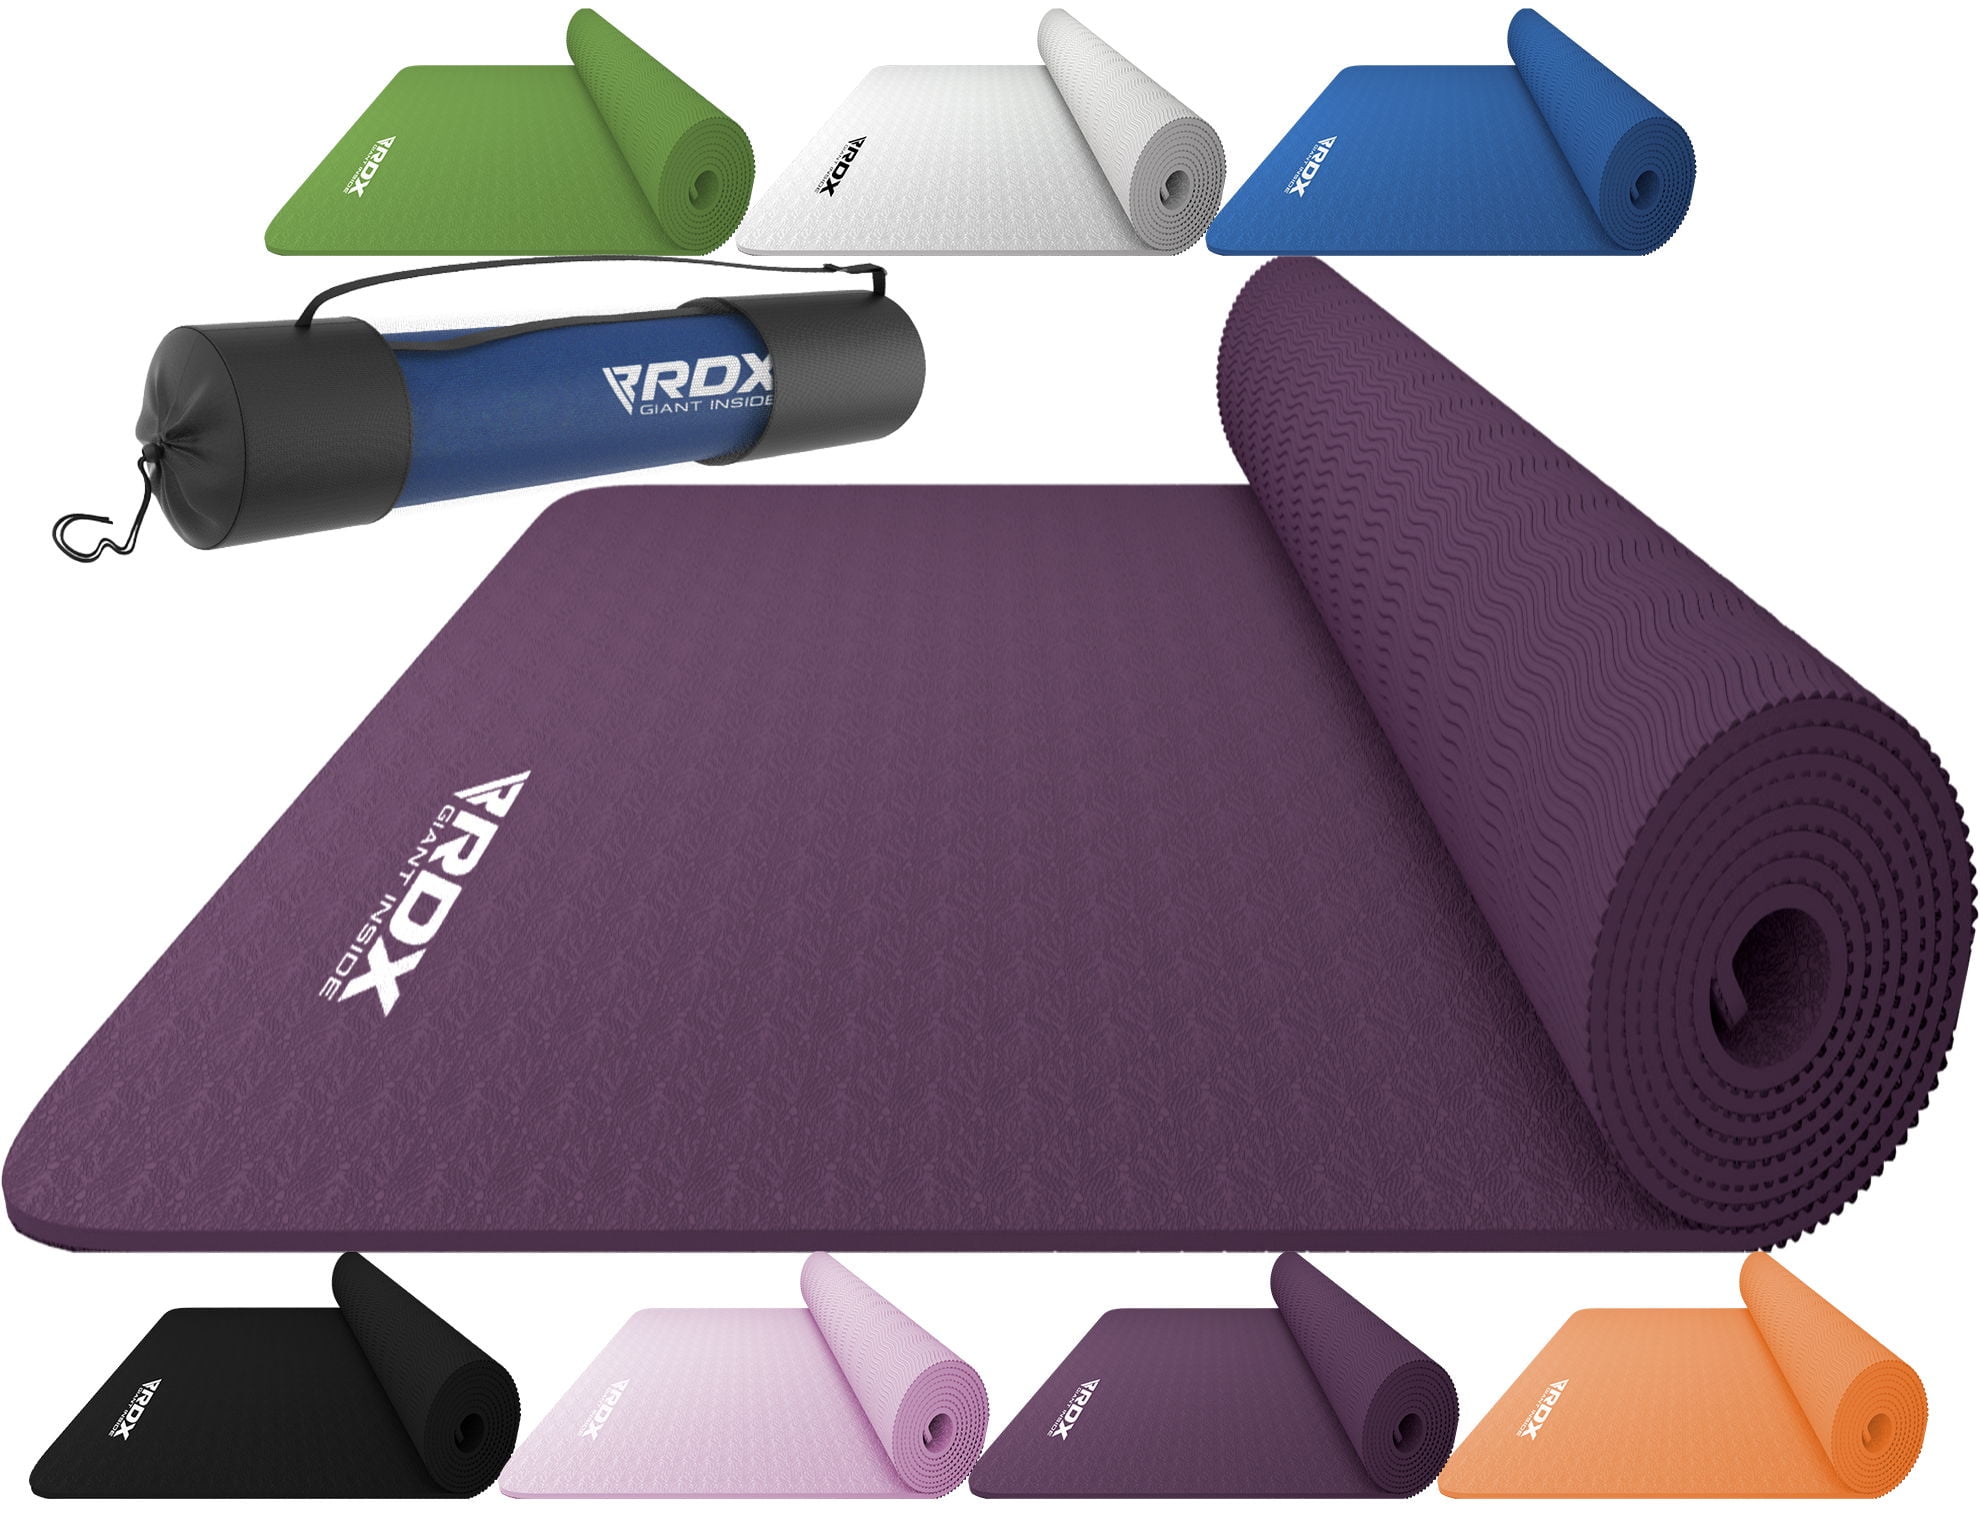 Yoga Mat 6mm Thick Exercise Fitness Physio Pilates Gym Mats Non Slip Carrier bD 